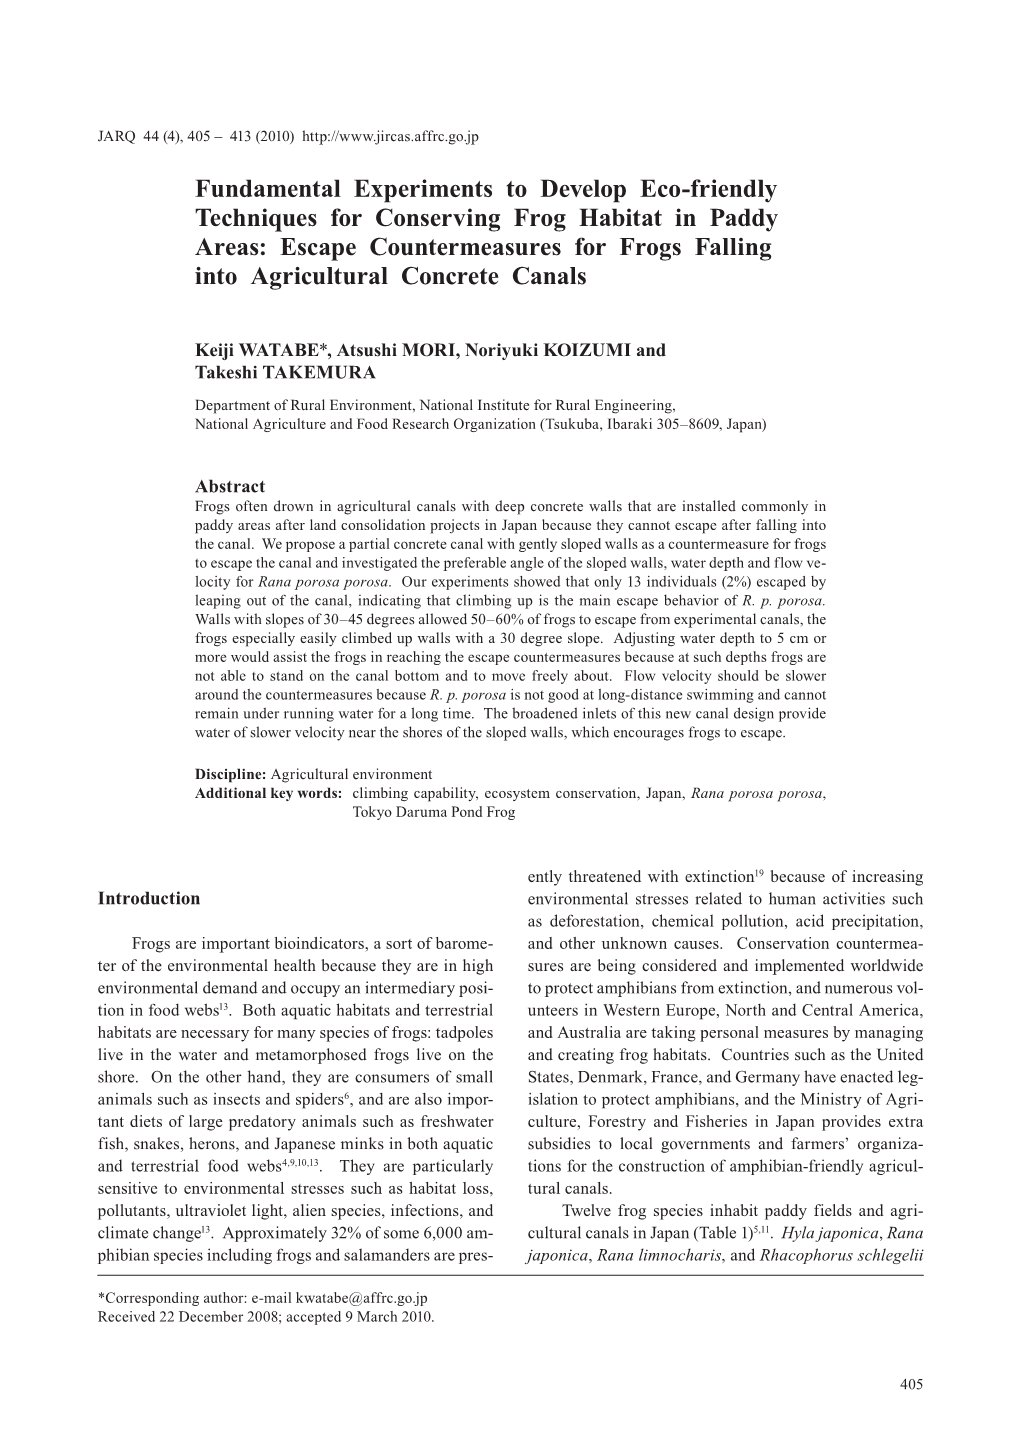 Fundamental Experiments to Develop Eco-Friendly Techniques for Conserving Frog Habitat in Paddy Areas Escape Countermeasures for Frogs Falling Into Agricultural Concrete Canals